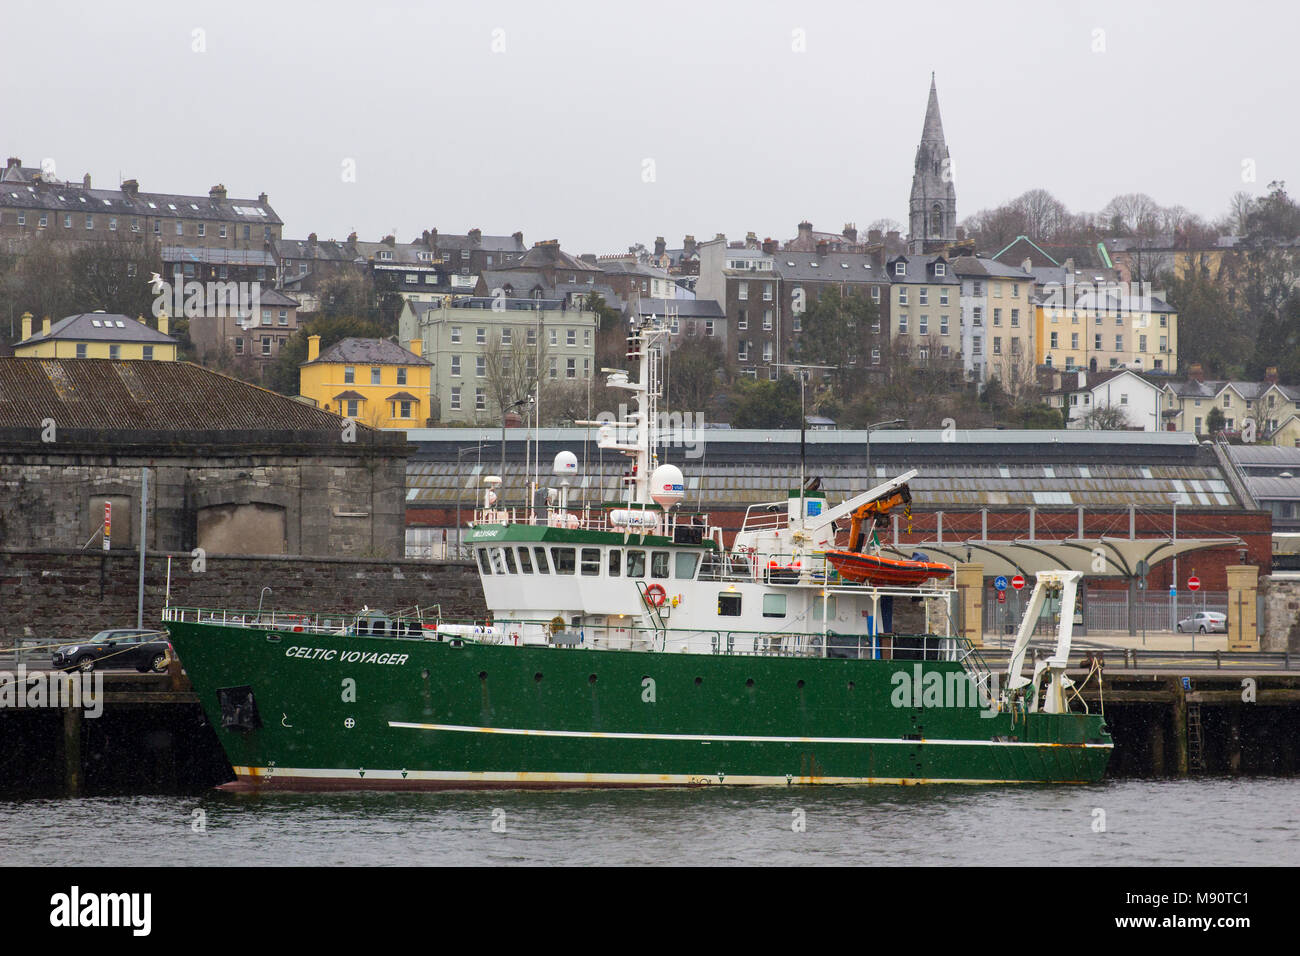 18 March 2018 Cork City Harbour Ireland The Marine Institute research vessel Celtic Voyager on her berth during a late winter snow storm Stock Photo